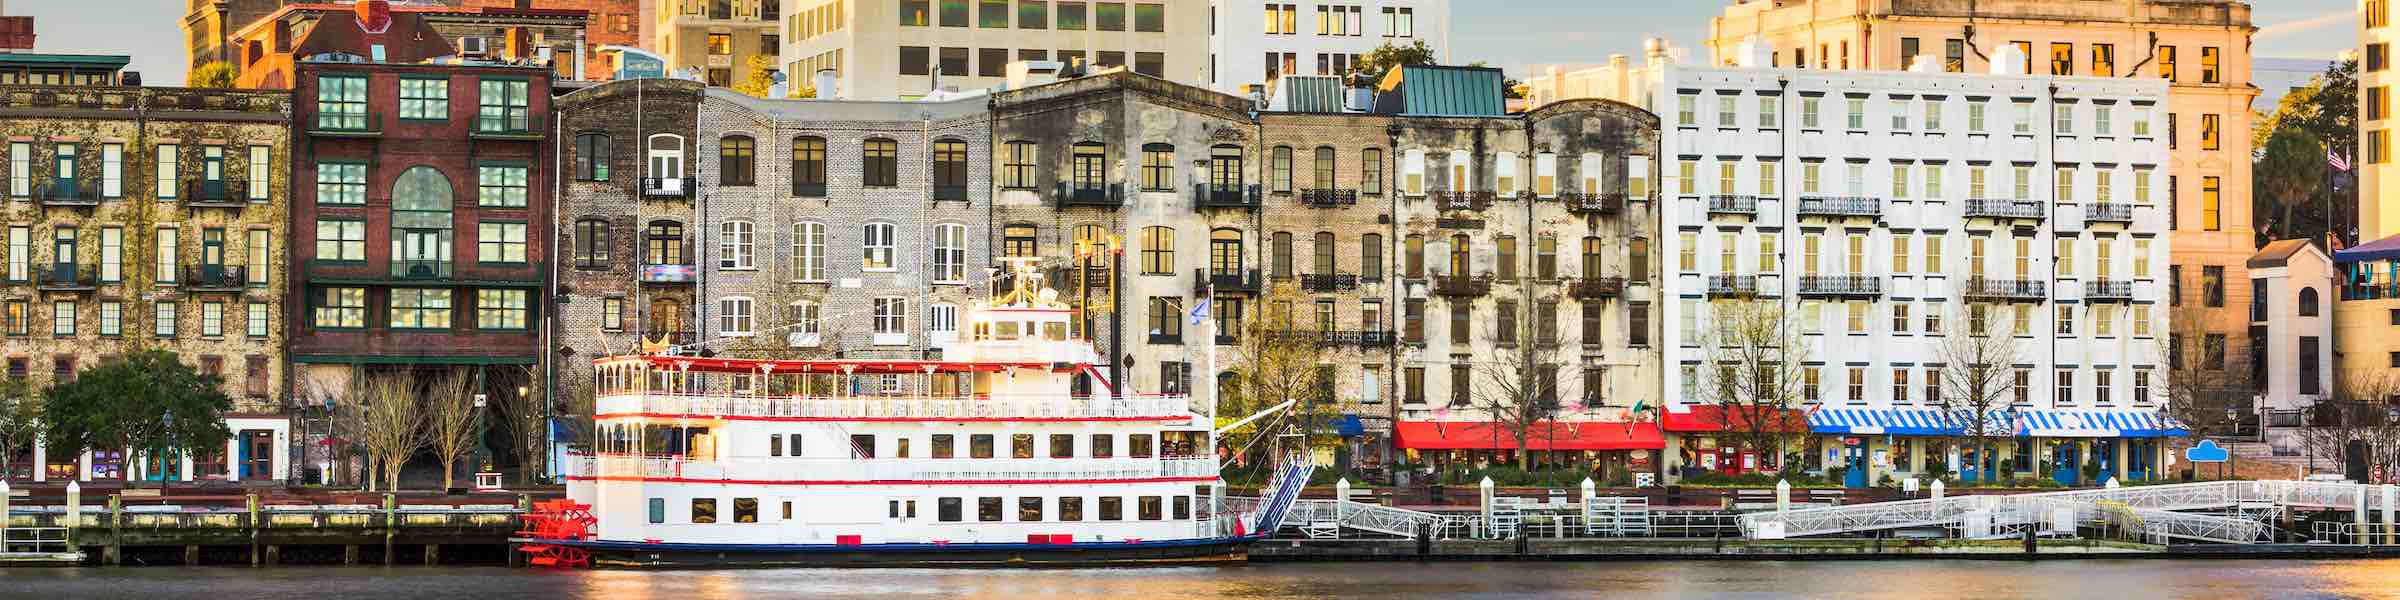 View of River Street, Savannah, GA, showing a red and white paddleboat in front of historic buildings formerly used as warehouses and offices for the shipping industry.